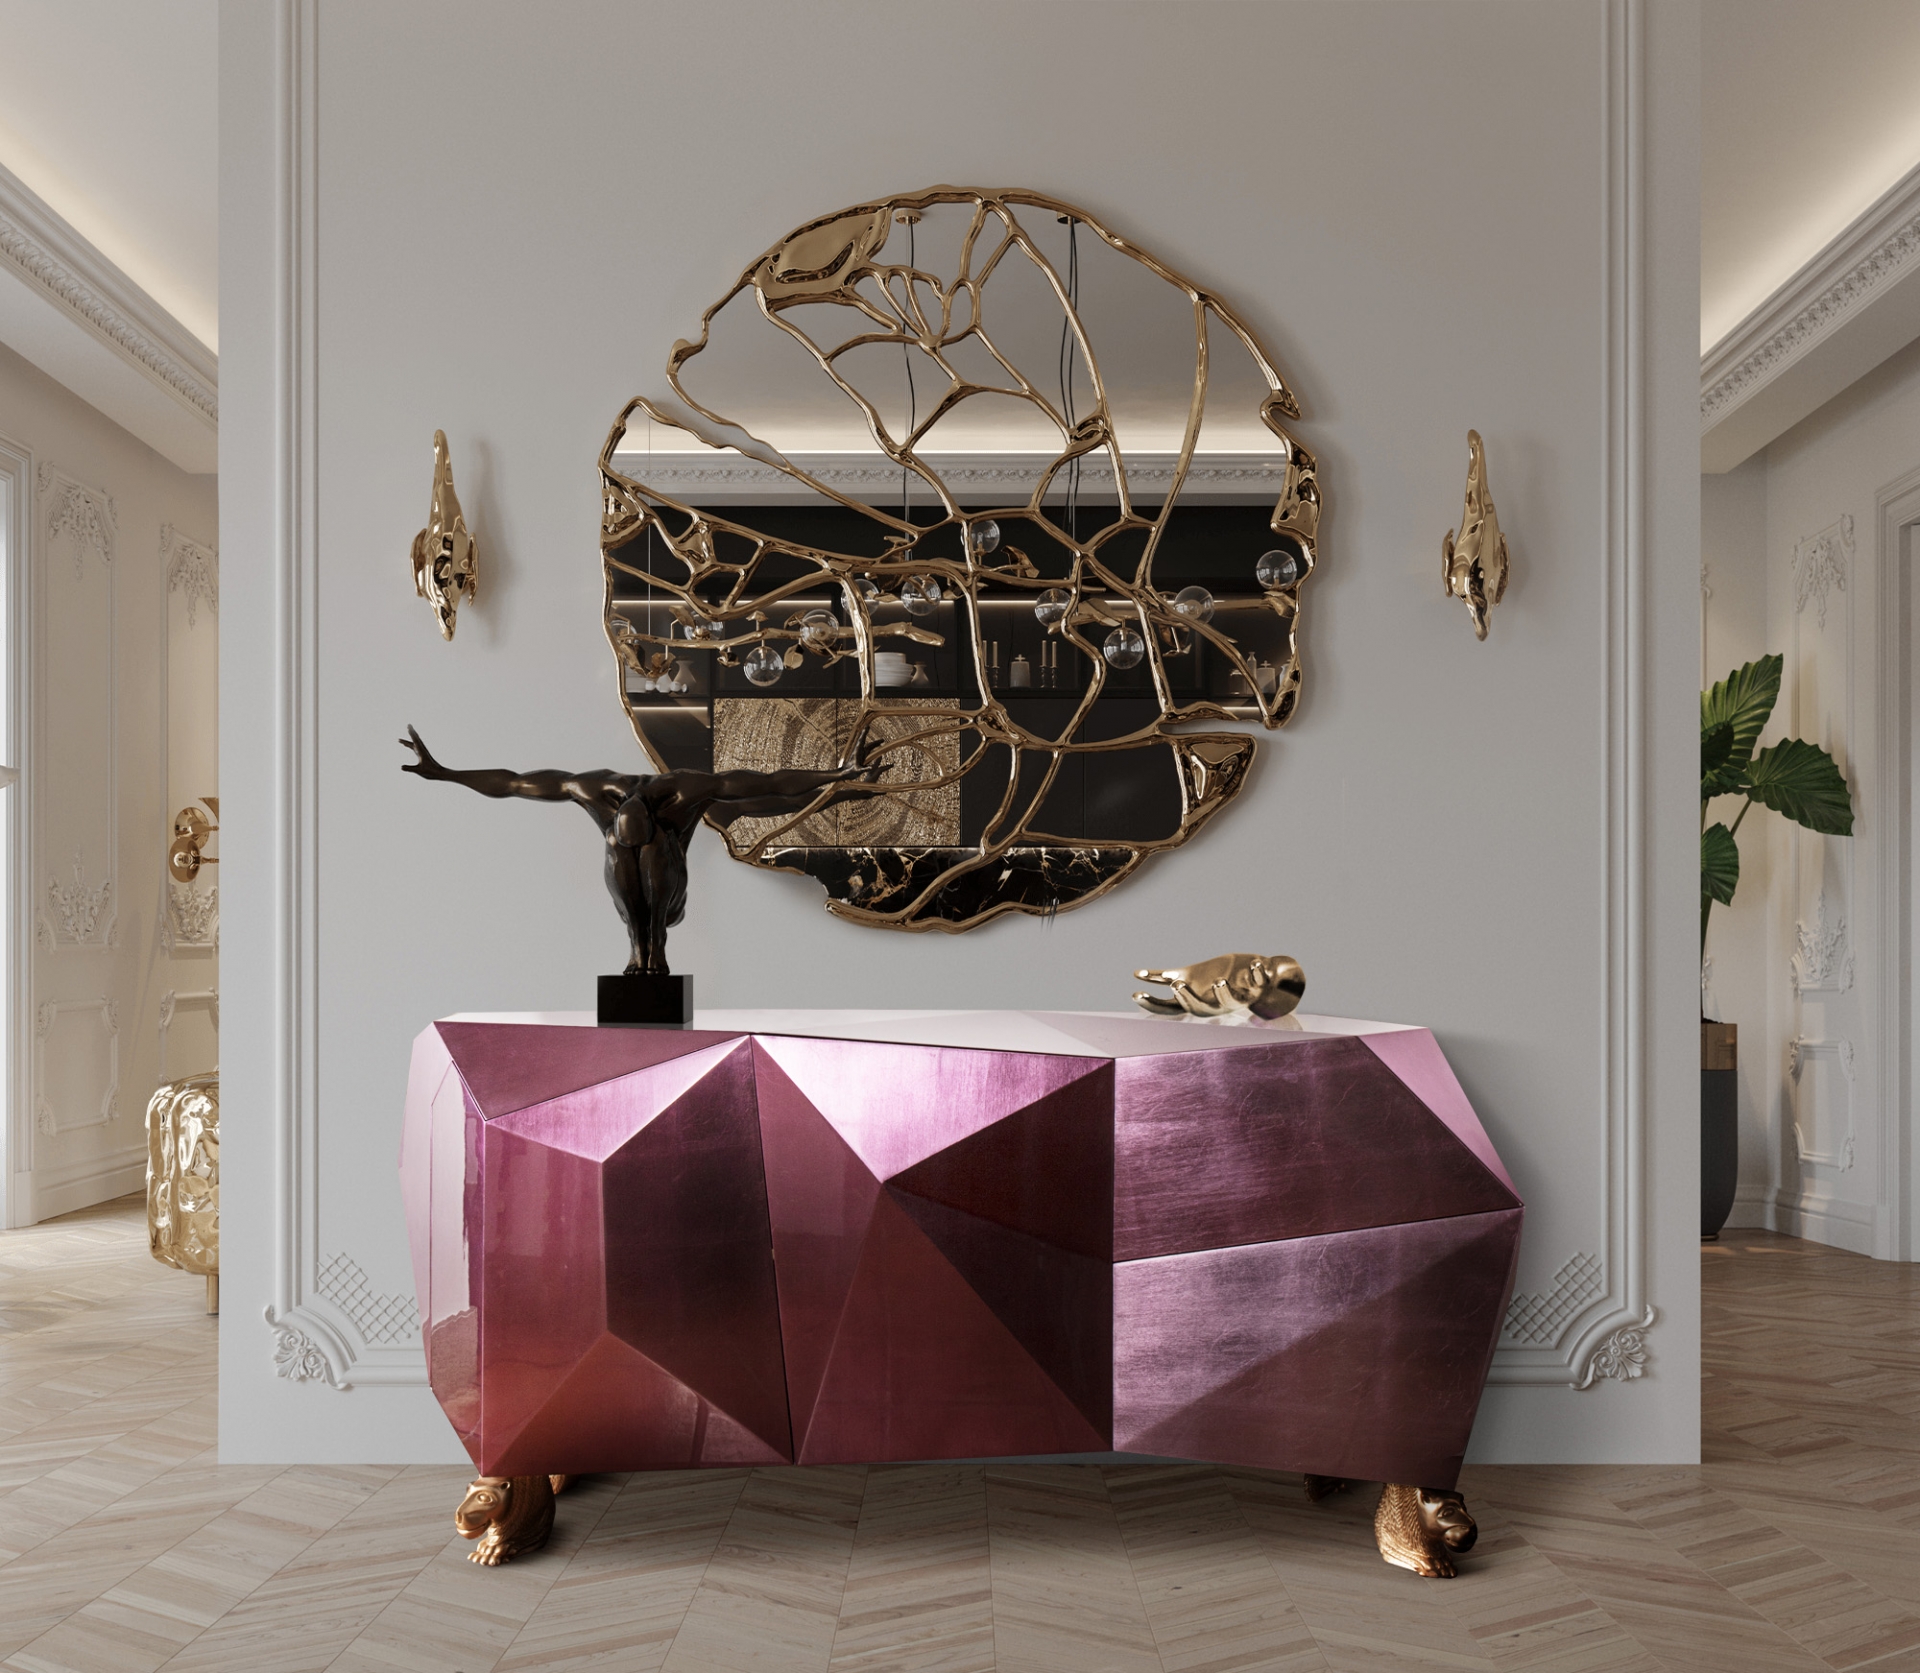 LUXURY HALLWAY DESIGN WITH LIMITED-EDITION FURNITURE by Boca do Lobo